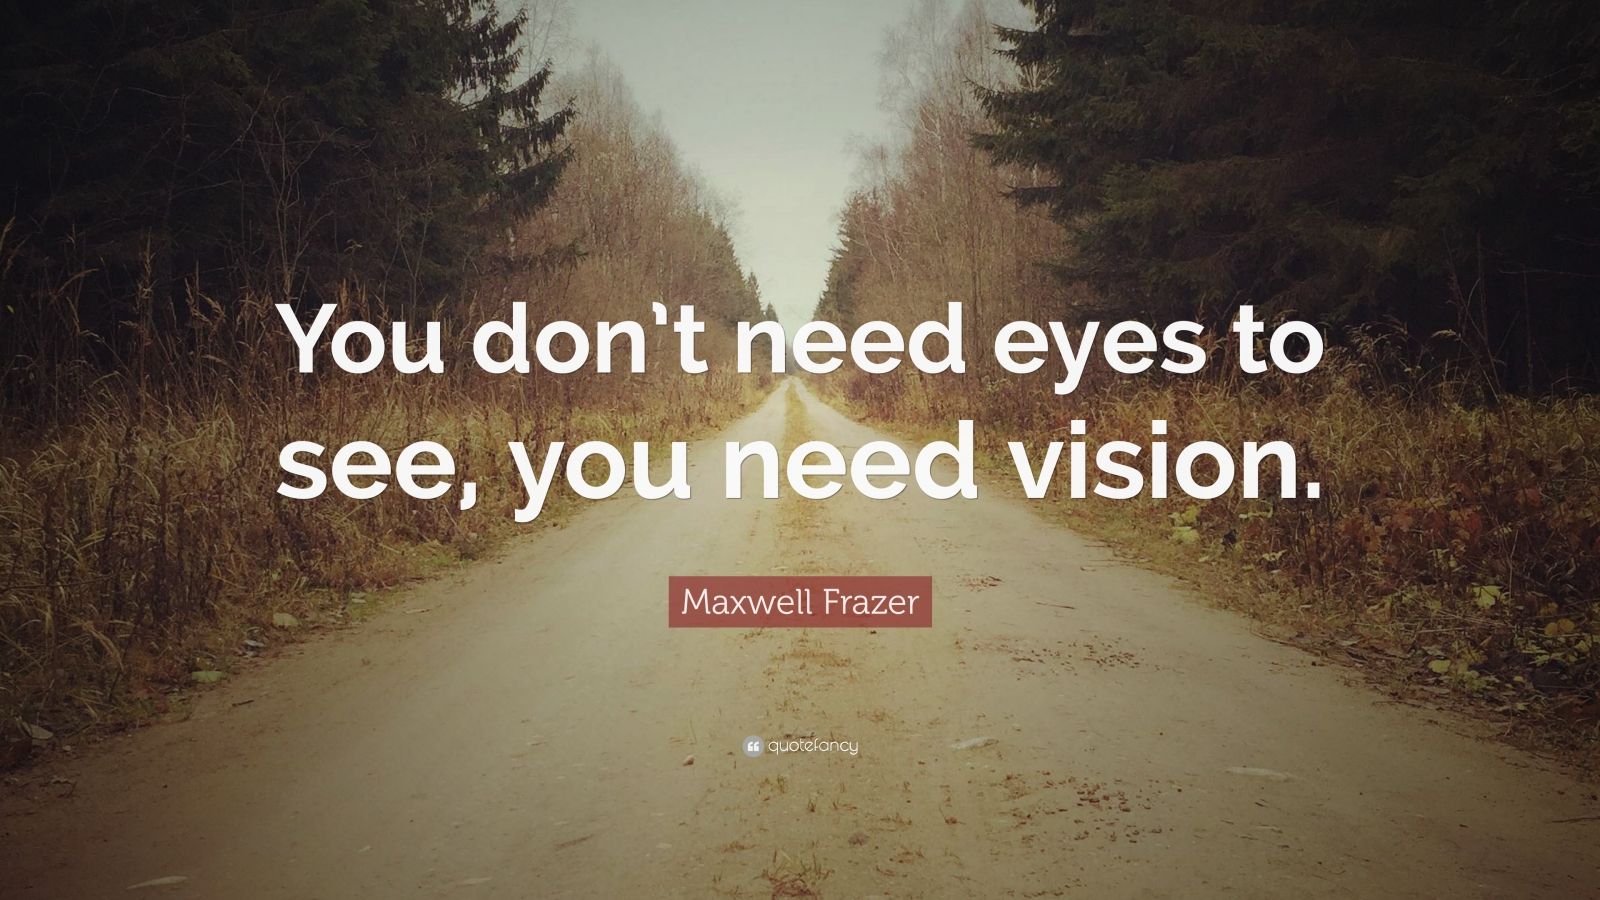 Maxwell Frazer Quote: “You don’t need eyes to see, you need vision ...